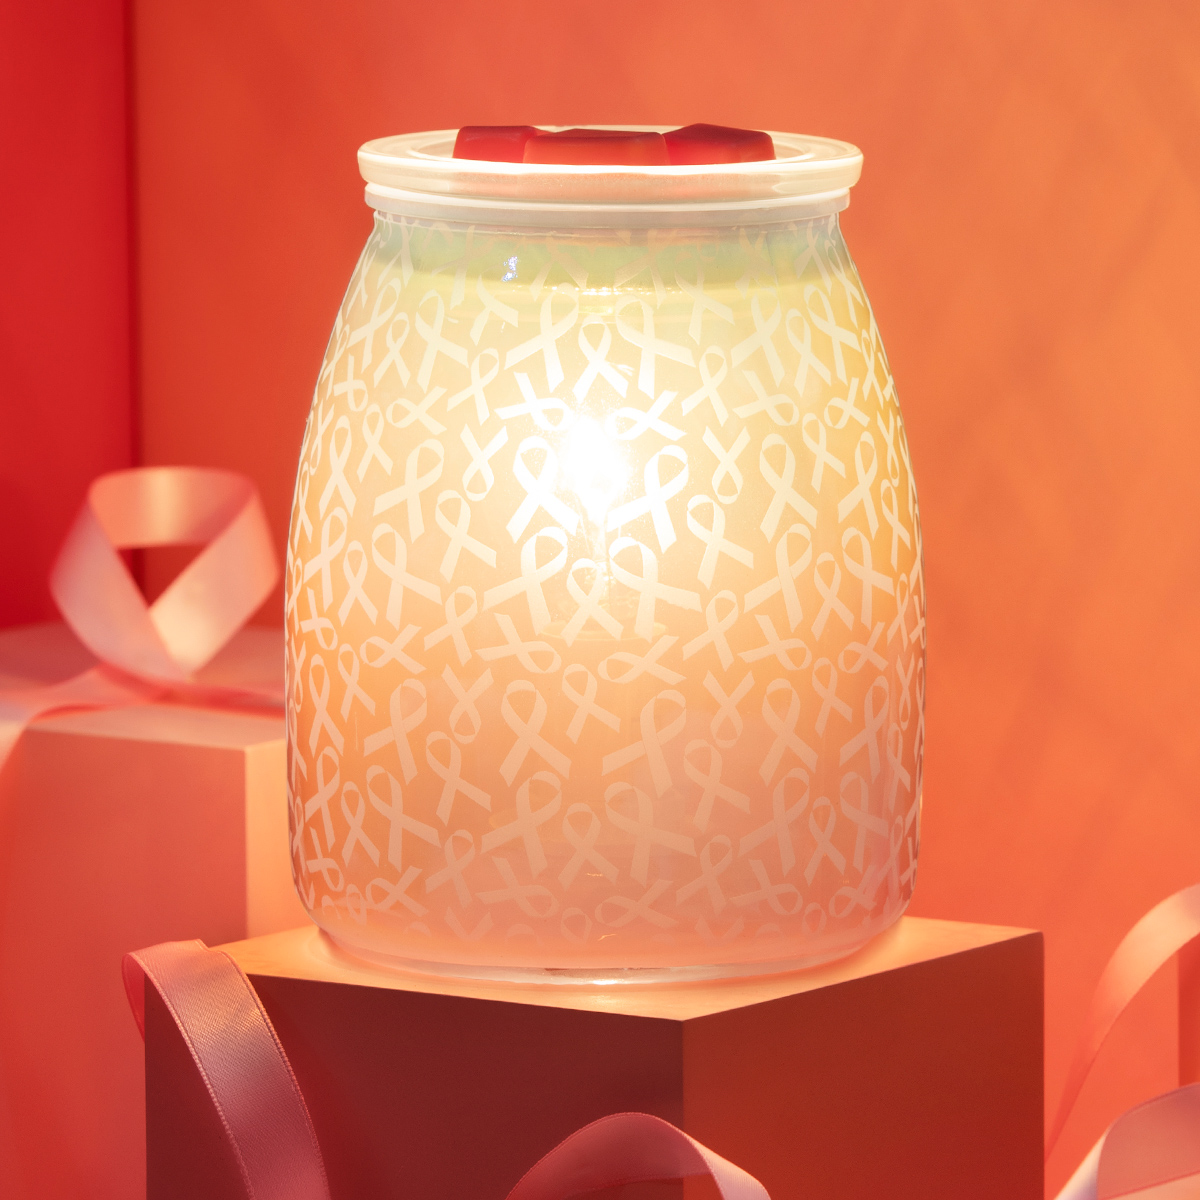 Scentsy's Hope, Strength & Love Warmer benefits National Breast Cancer Foundation